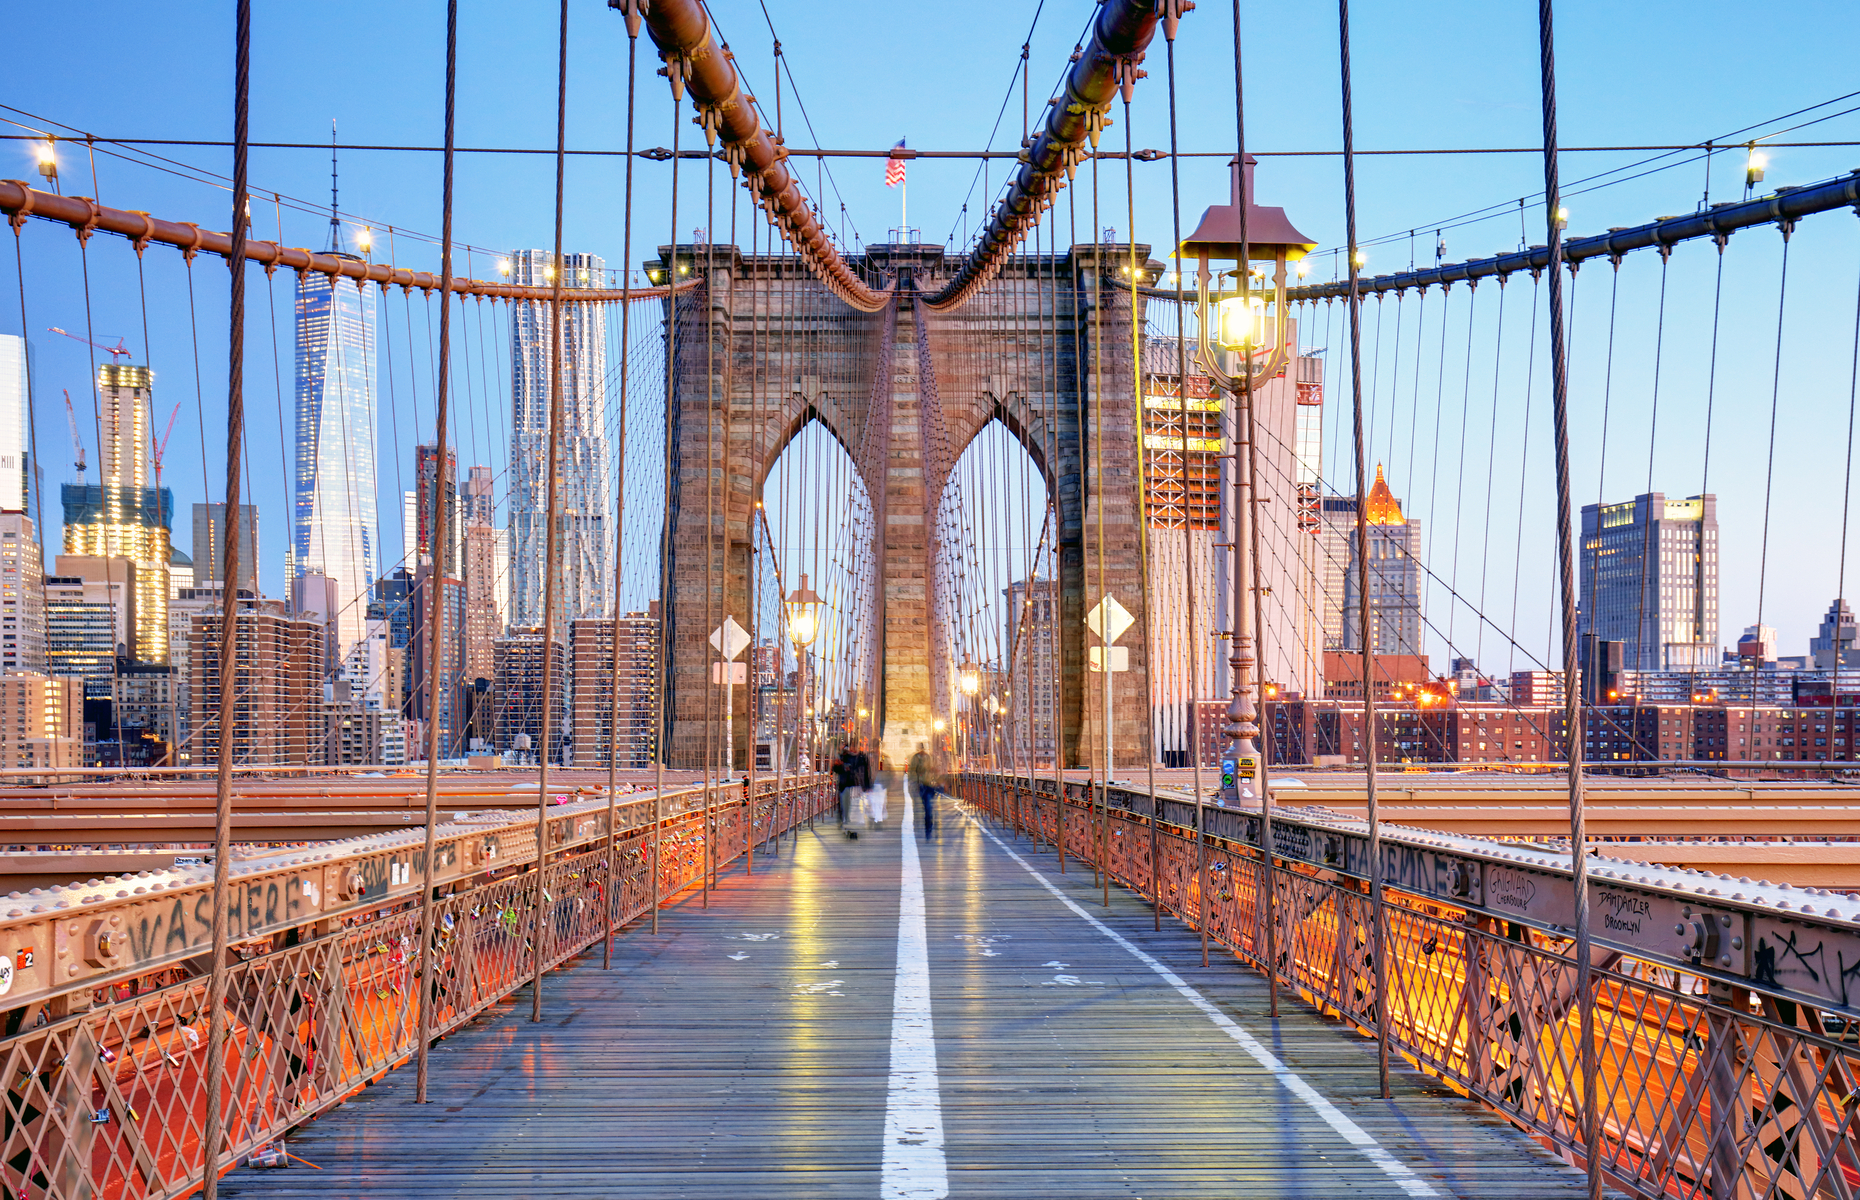 When isn’t a good time to visit the Big Apple? New York City was ranked the No. 3 city in the world by <a href="https://www.newswire.ca/news-releases/resonance-consultancy-reveals-the-2023-world-s-best-cities-875804710.html" rel="noreferrer noopener">Resonance</a>, which looks at not just what it’s like for visitors but factors including livability (like walkability) and lovability (think Instagram hashtags). Whether it’s your first or fifth visit, there’s always something new to see and do in NYC, so head to <a href="https://www.metmuseum.org/" rel="noreferrer noopener">The Met</a>, take a stroll across the Brooklyn Bridge, ride the elevator up the Empire State Building or dine out at one of the <a href="https://www.nytimes.com/interactive/2023/dining/best-nyc-restaurants.html" rel="noreferrer noopener">city’s best restaurants</a>.